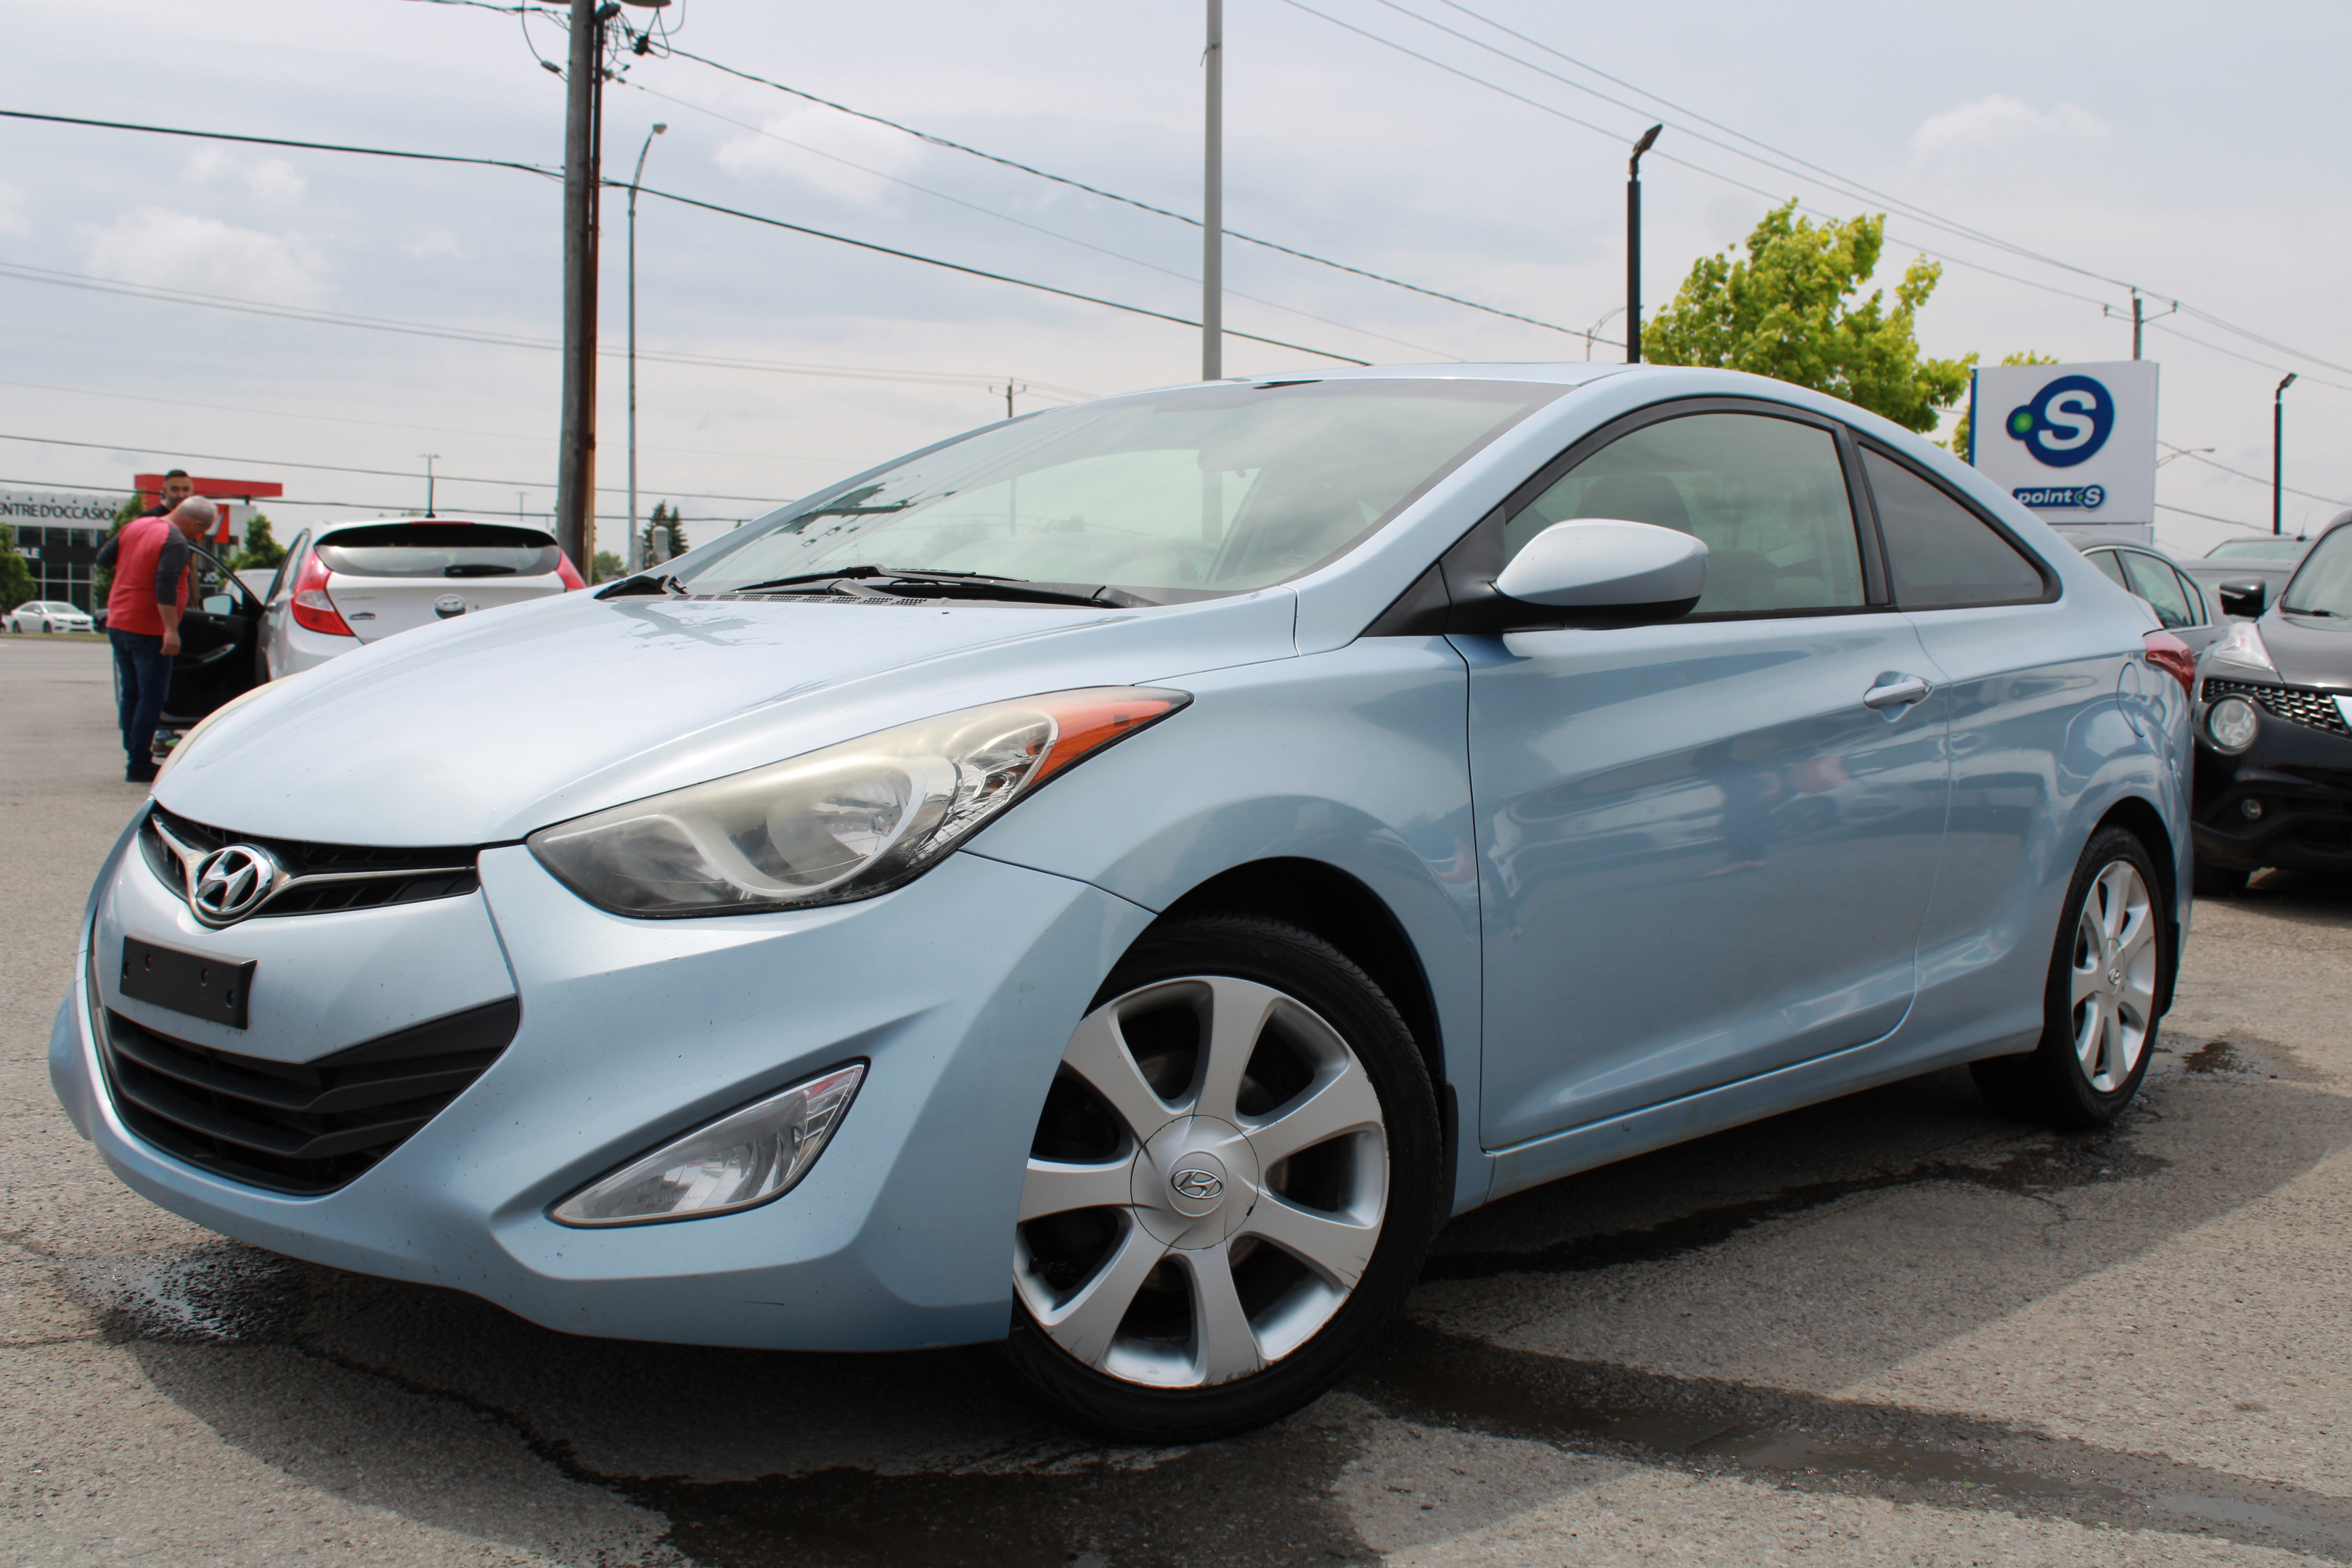 2013 Hyundai Elantra Coupe 2dr Cpe GLS, MAGS, BLUETOOTH, A/C, TOIT OUVRANT